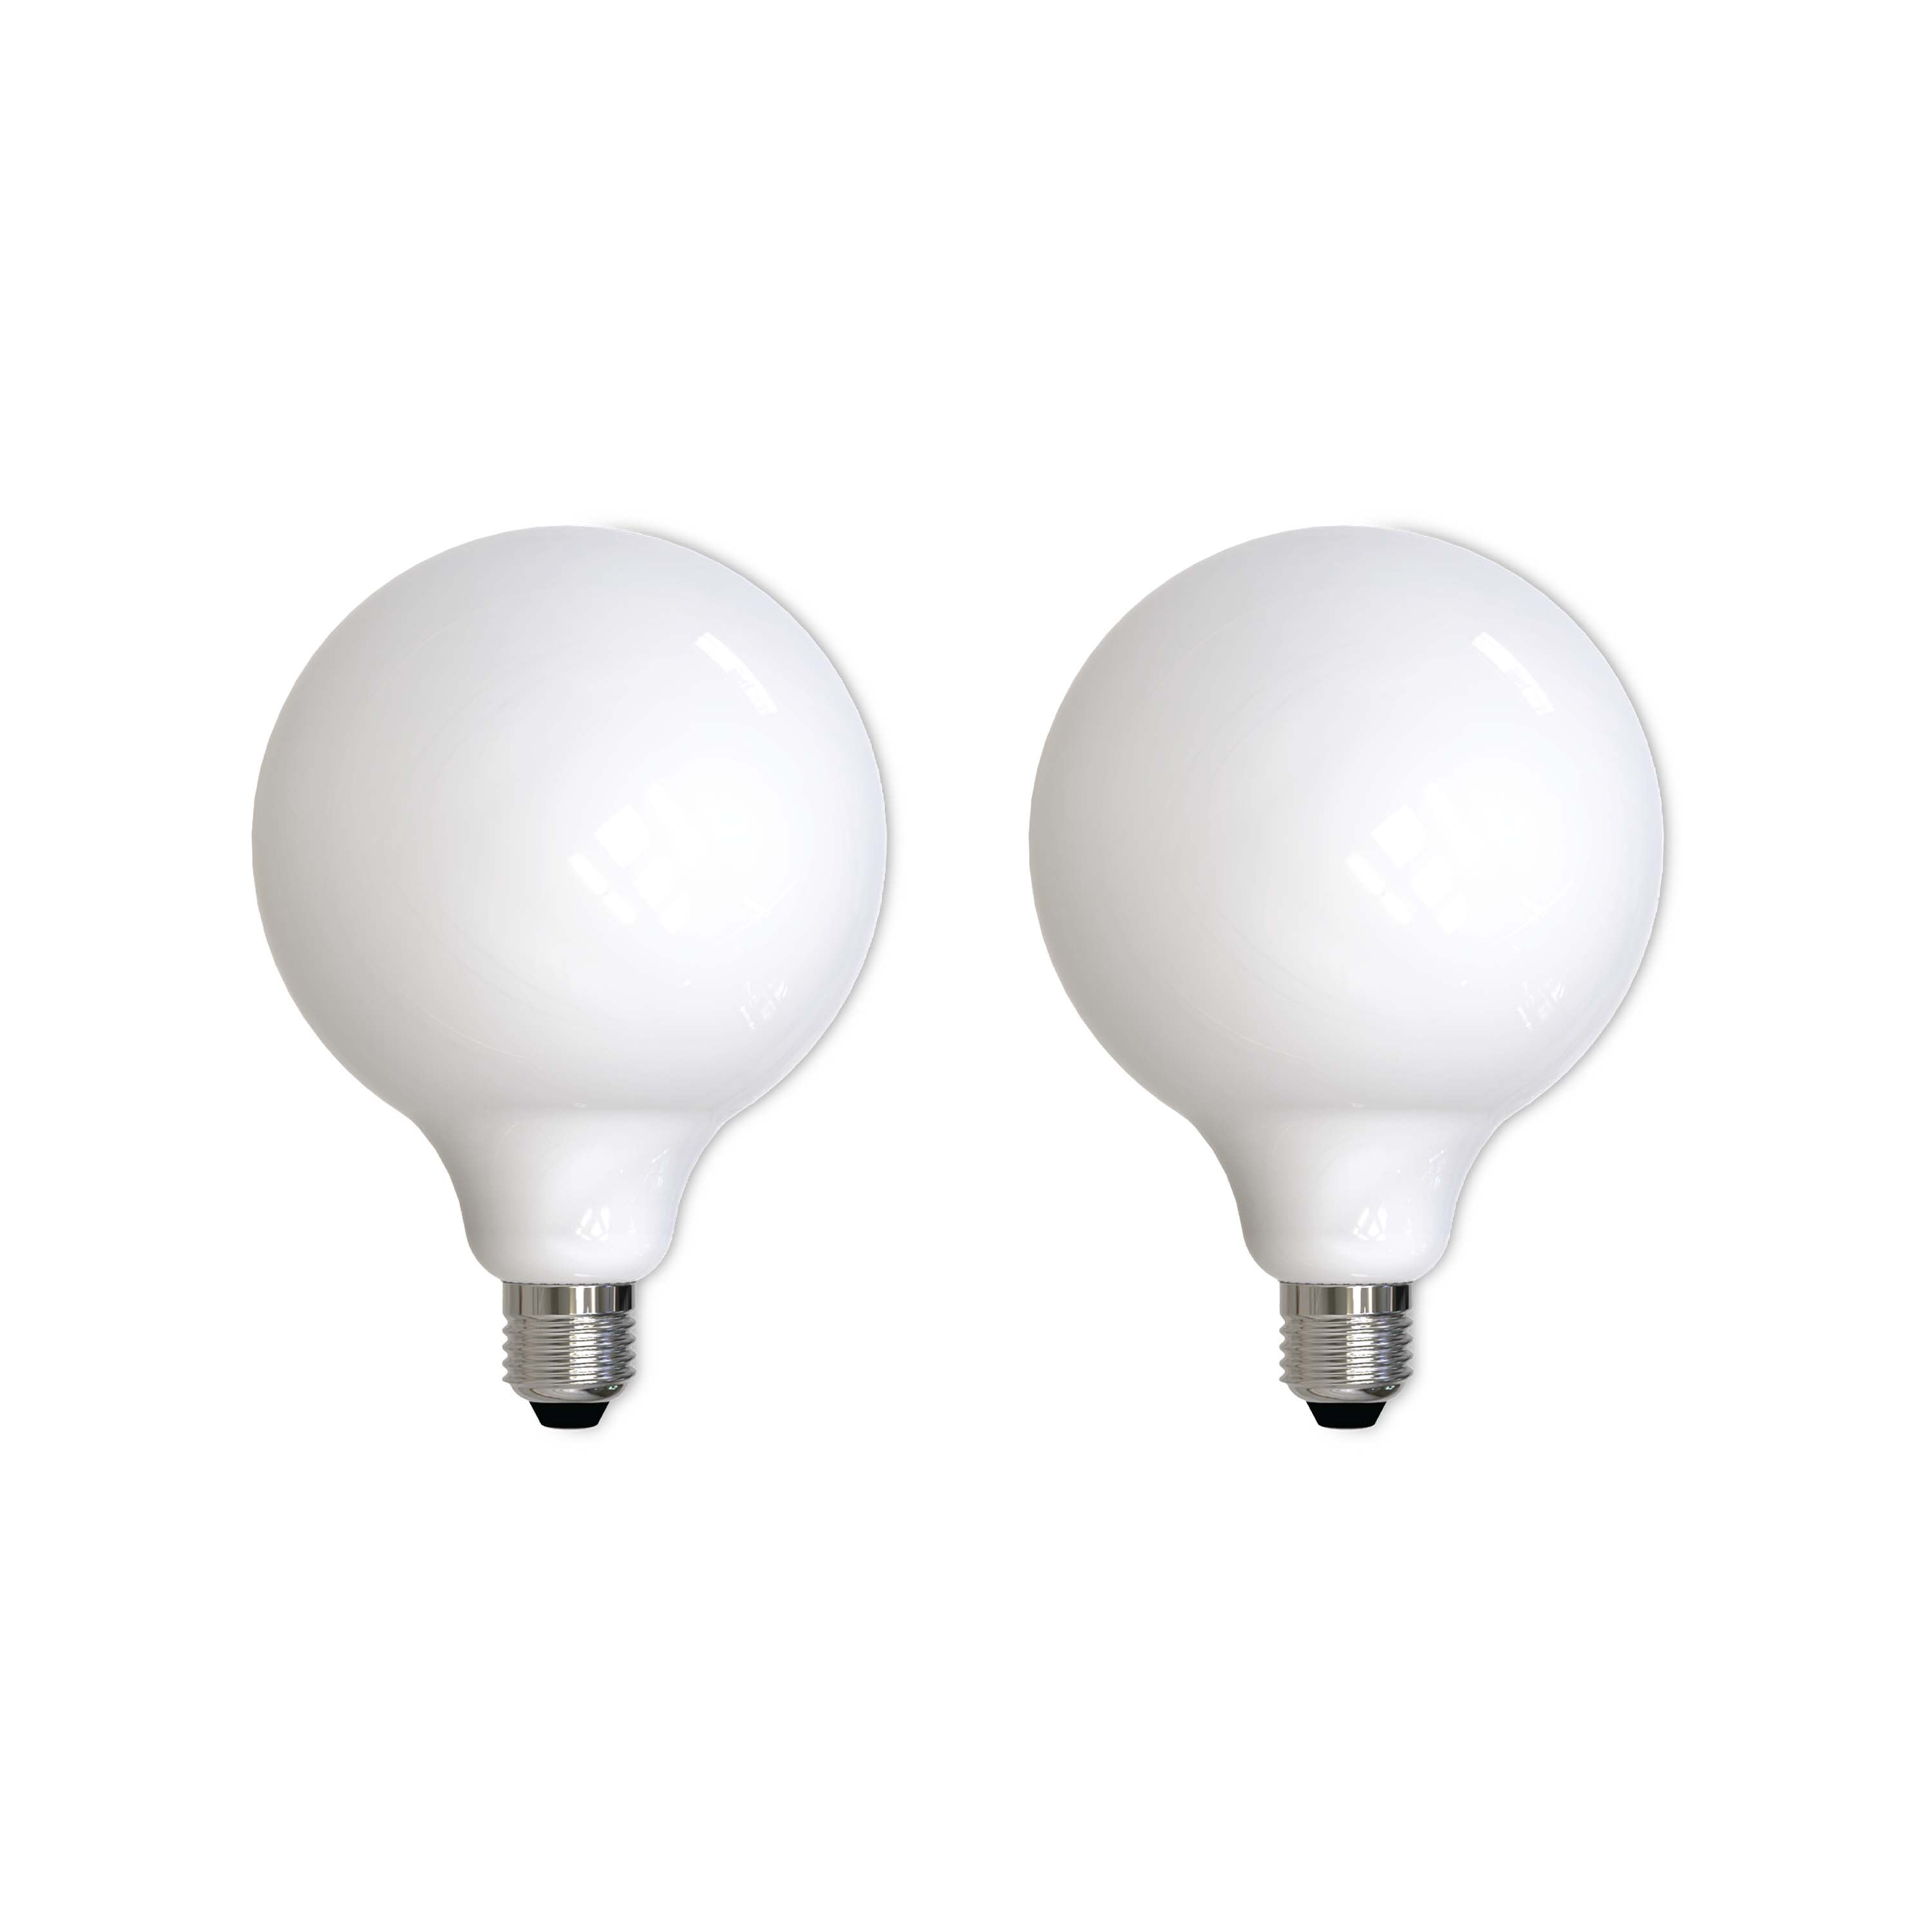 Picture of Bulbrite Pack of (2) 8.5 Watt Dimmable Milky Filament G40 Medium (E26) LED Bulb - 800 Lumens  3000K  and 90 CRI